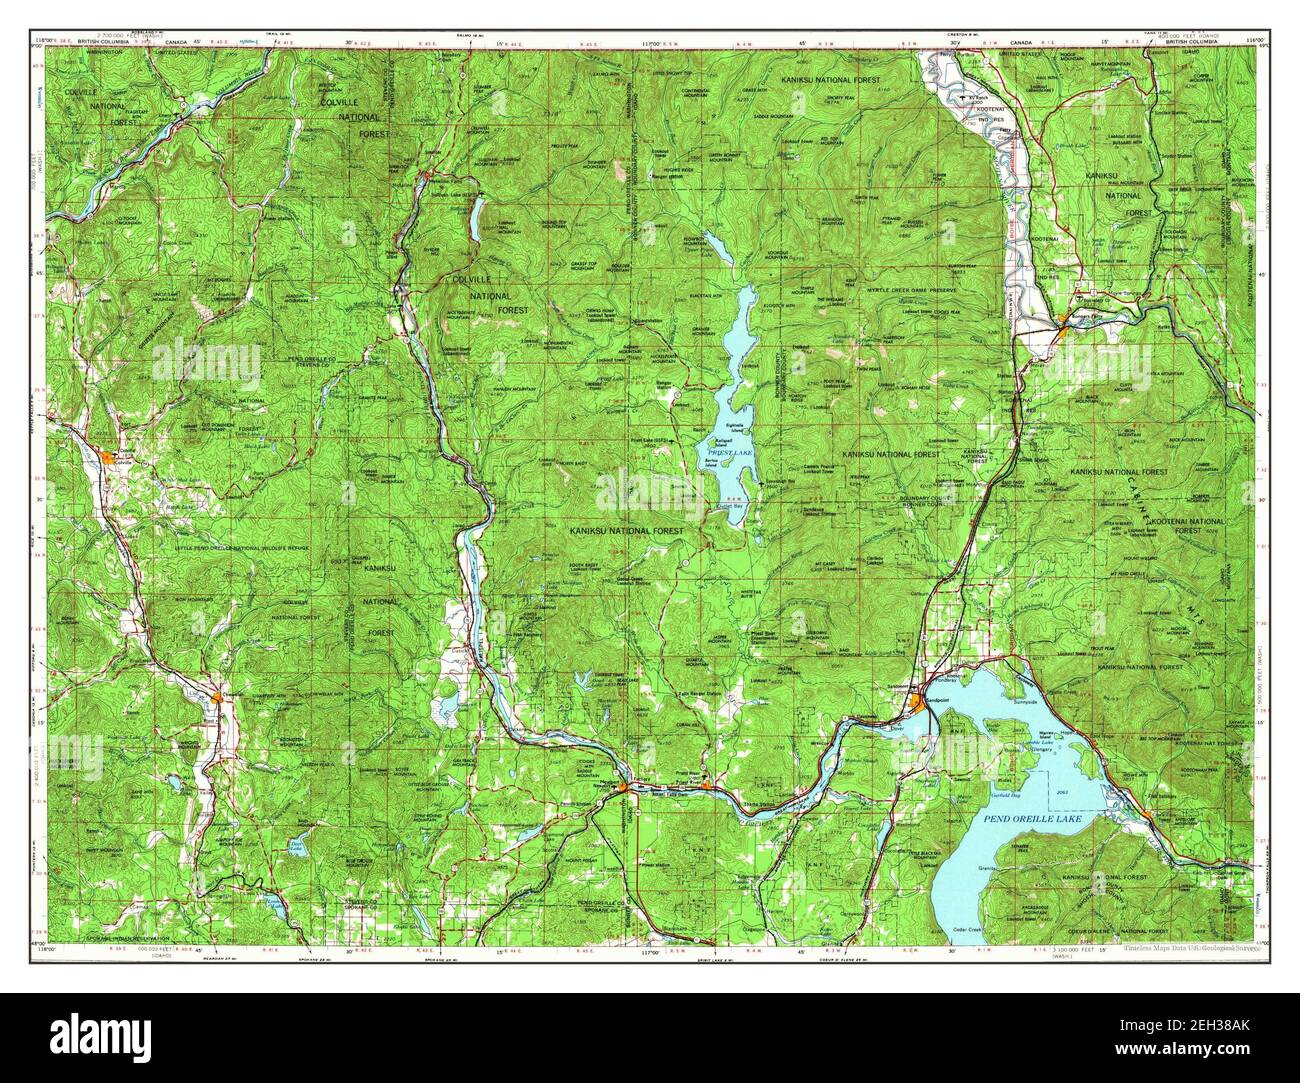 Sandpoint, Idaho, map 1958, 1:250000, United States of America by Timeless Maps, data U.S. Geological Survey Stock Photo